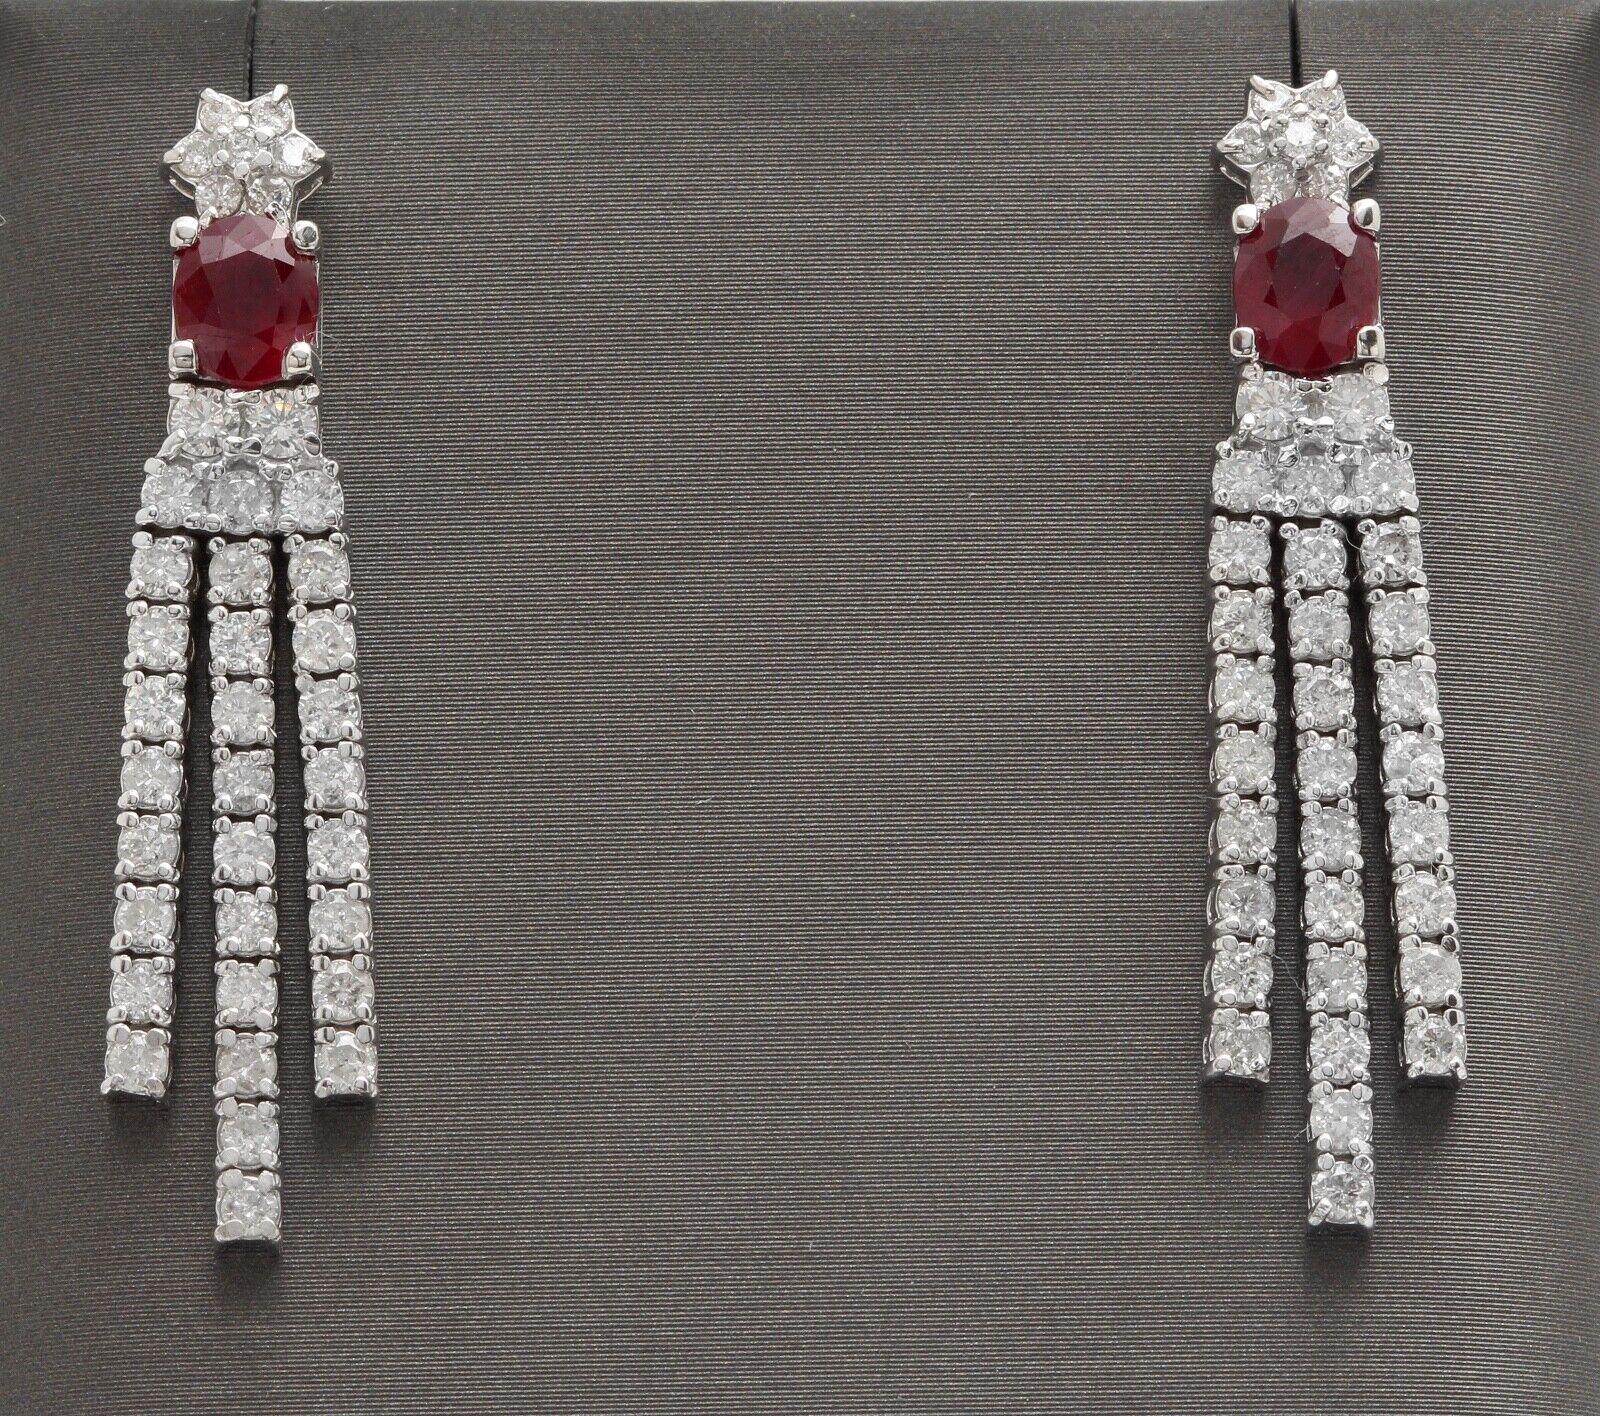 Exquisite 3.80 Carats Natural Red Ruby and Diamond 14K Solid White Gold Dangling Earrings

Amazing looking piece! 

Suggested Replacement Value $8,000.00

Total Natural Round Cut White Diamonds Weight: Approx. 2.20 Carats (color G-H / Clarity SI)